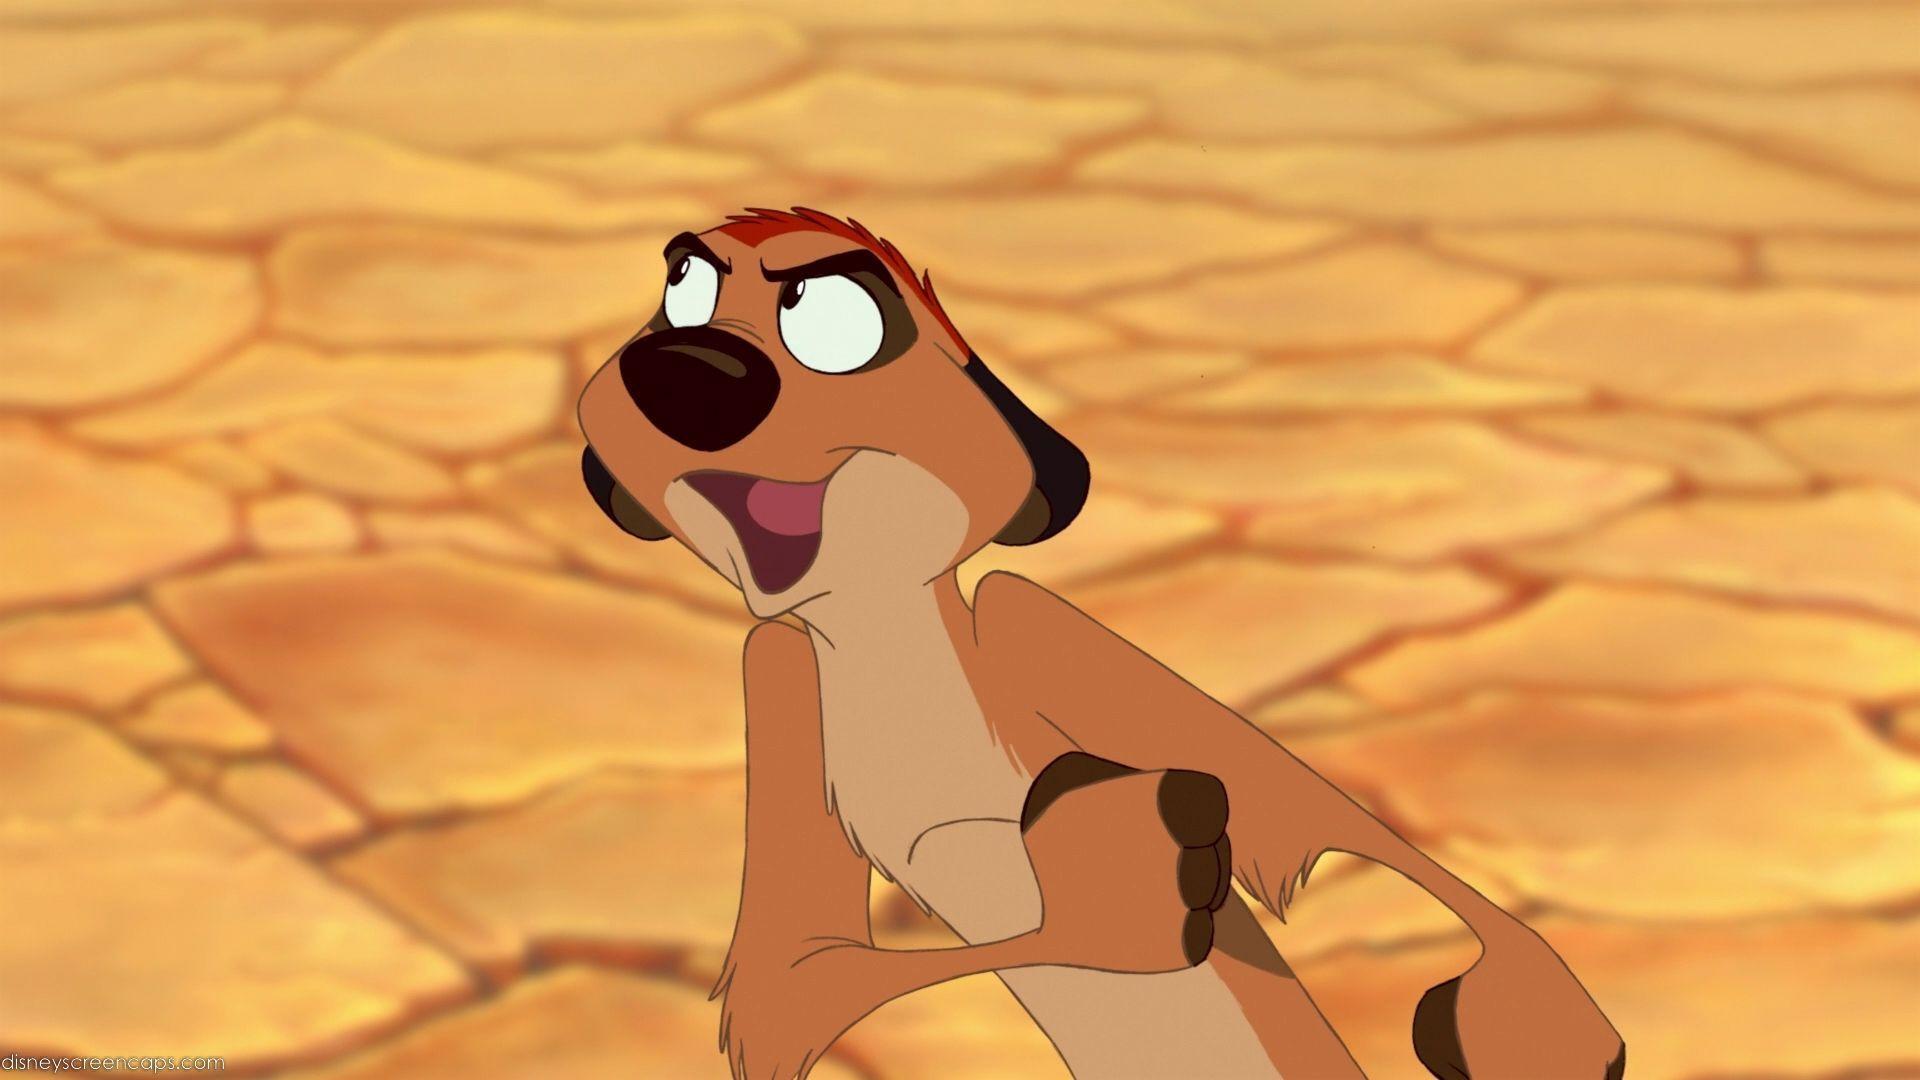 Disney Quote of the Month 2012: The Lion King Poll